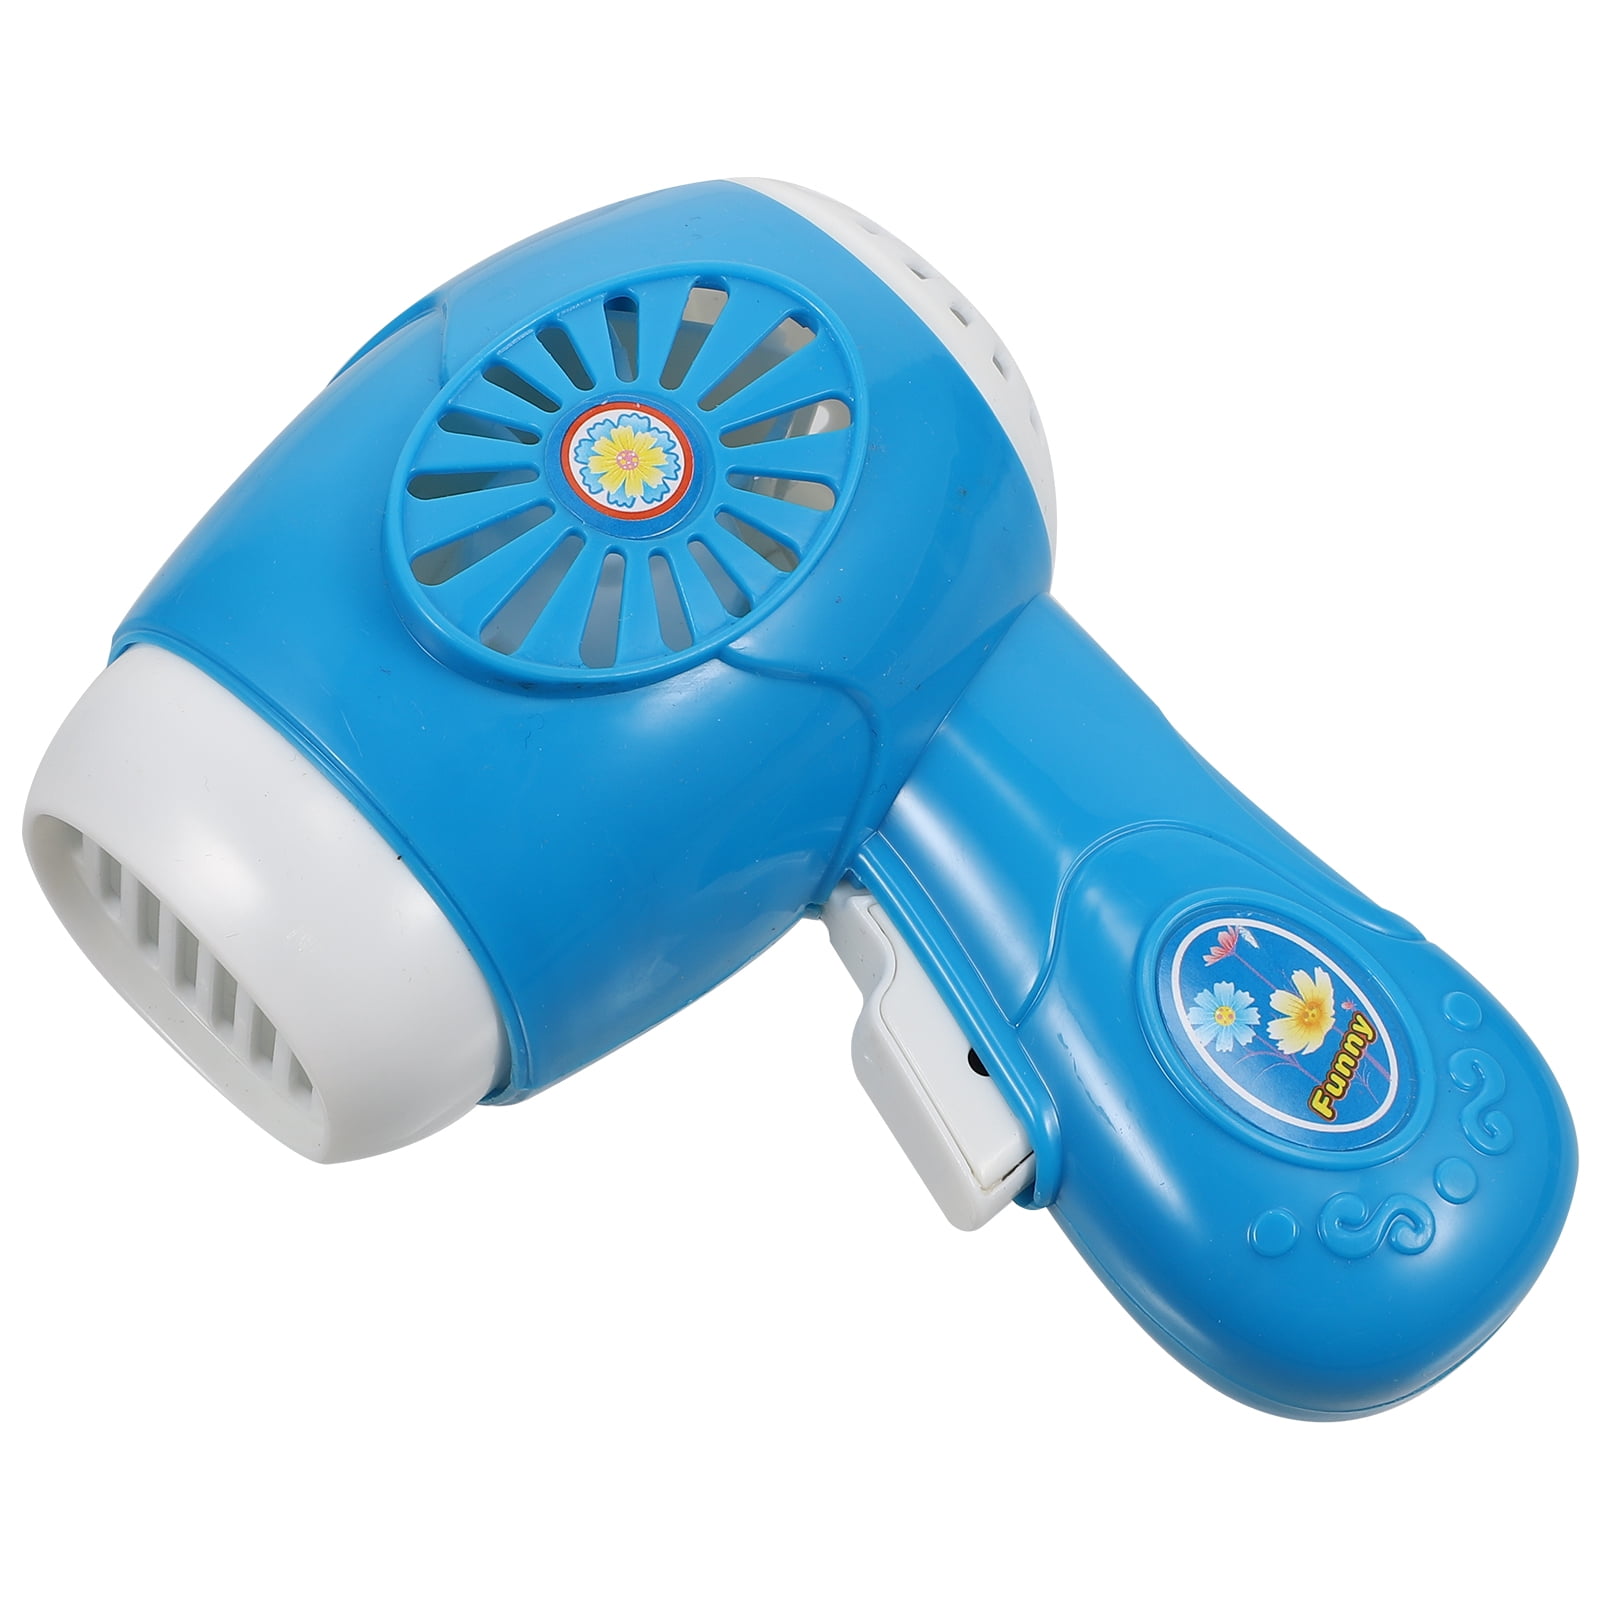 Simulation Mini Hair Dryer Model Toy for Kids Pretend Play Toys Appliances EQM 